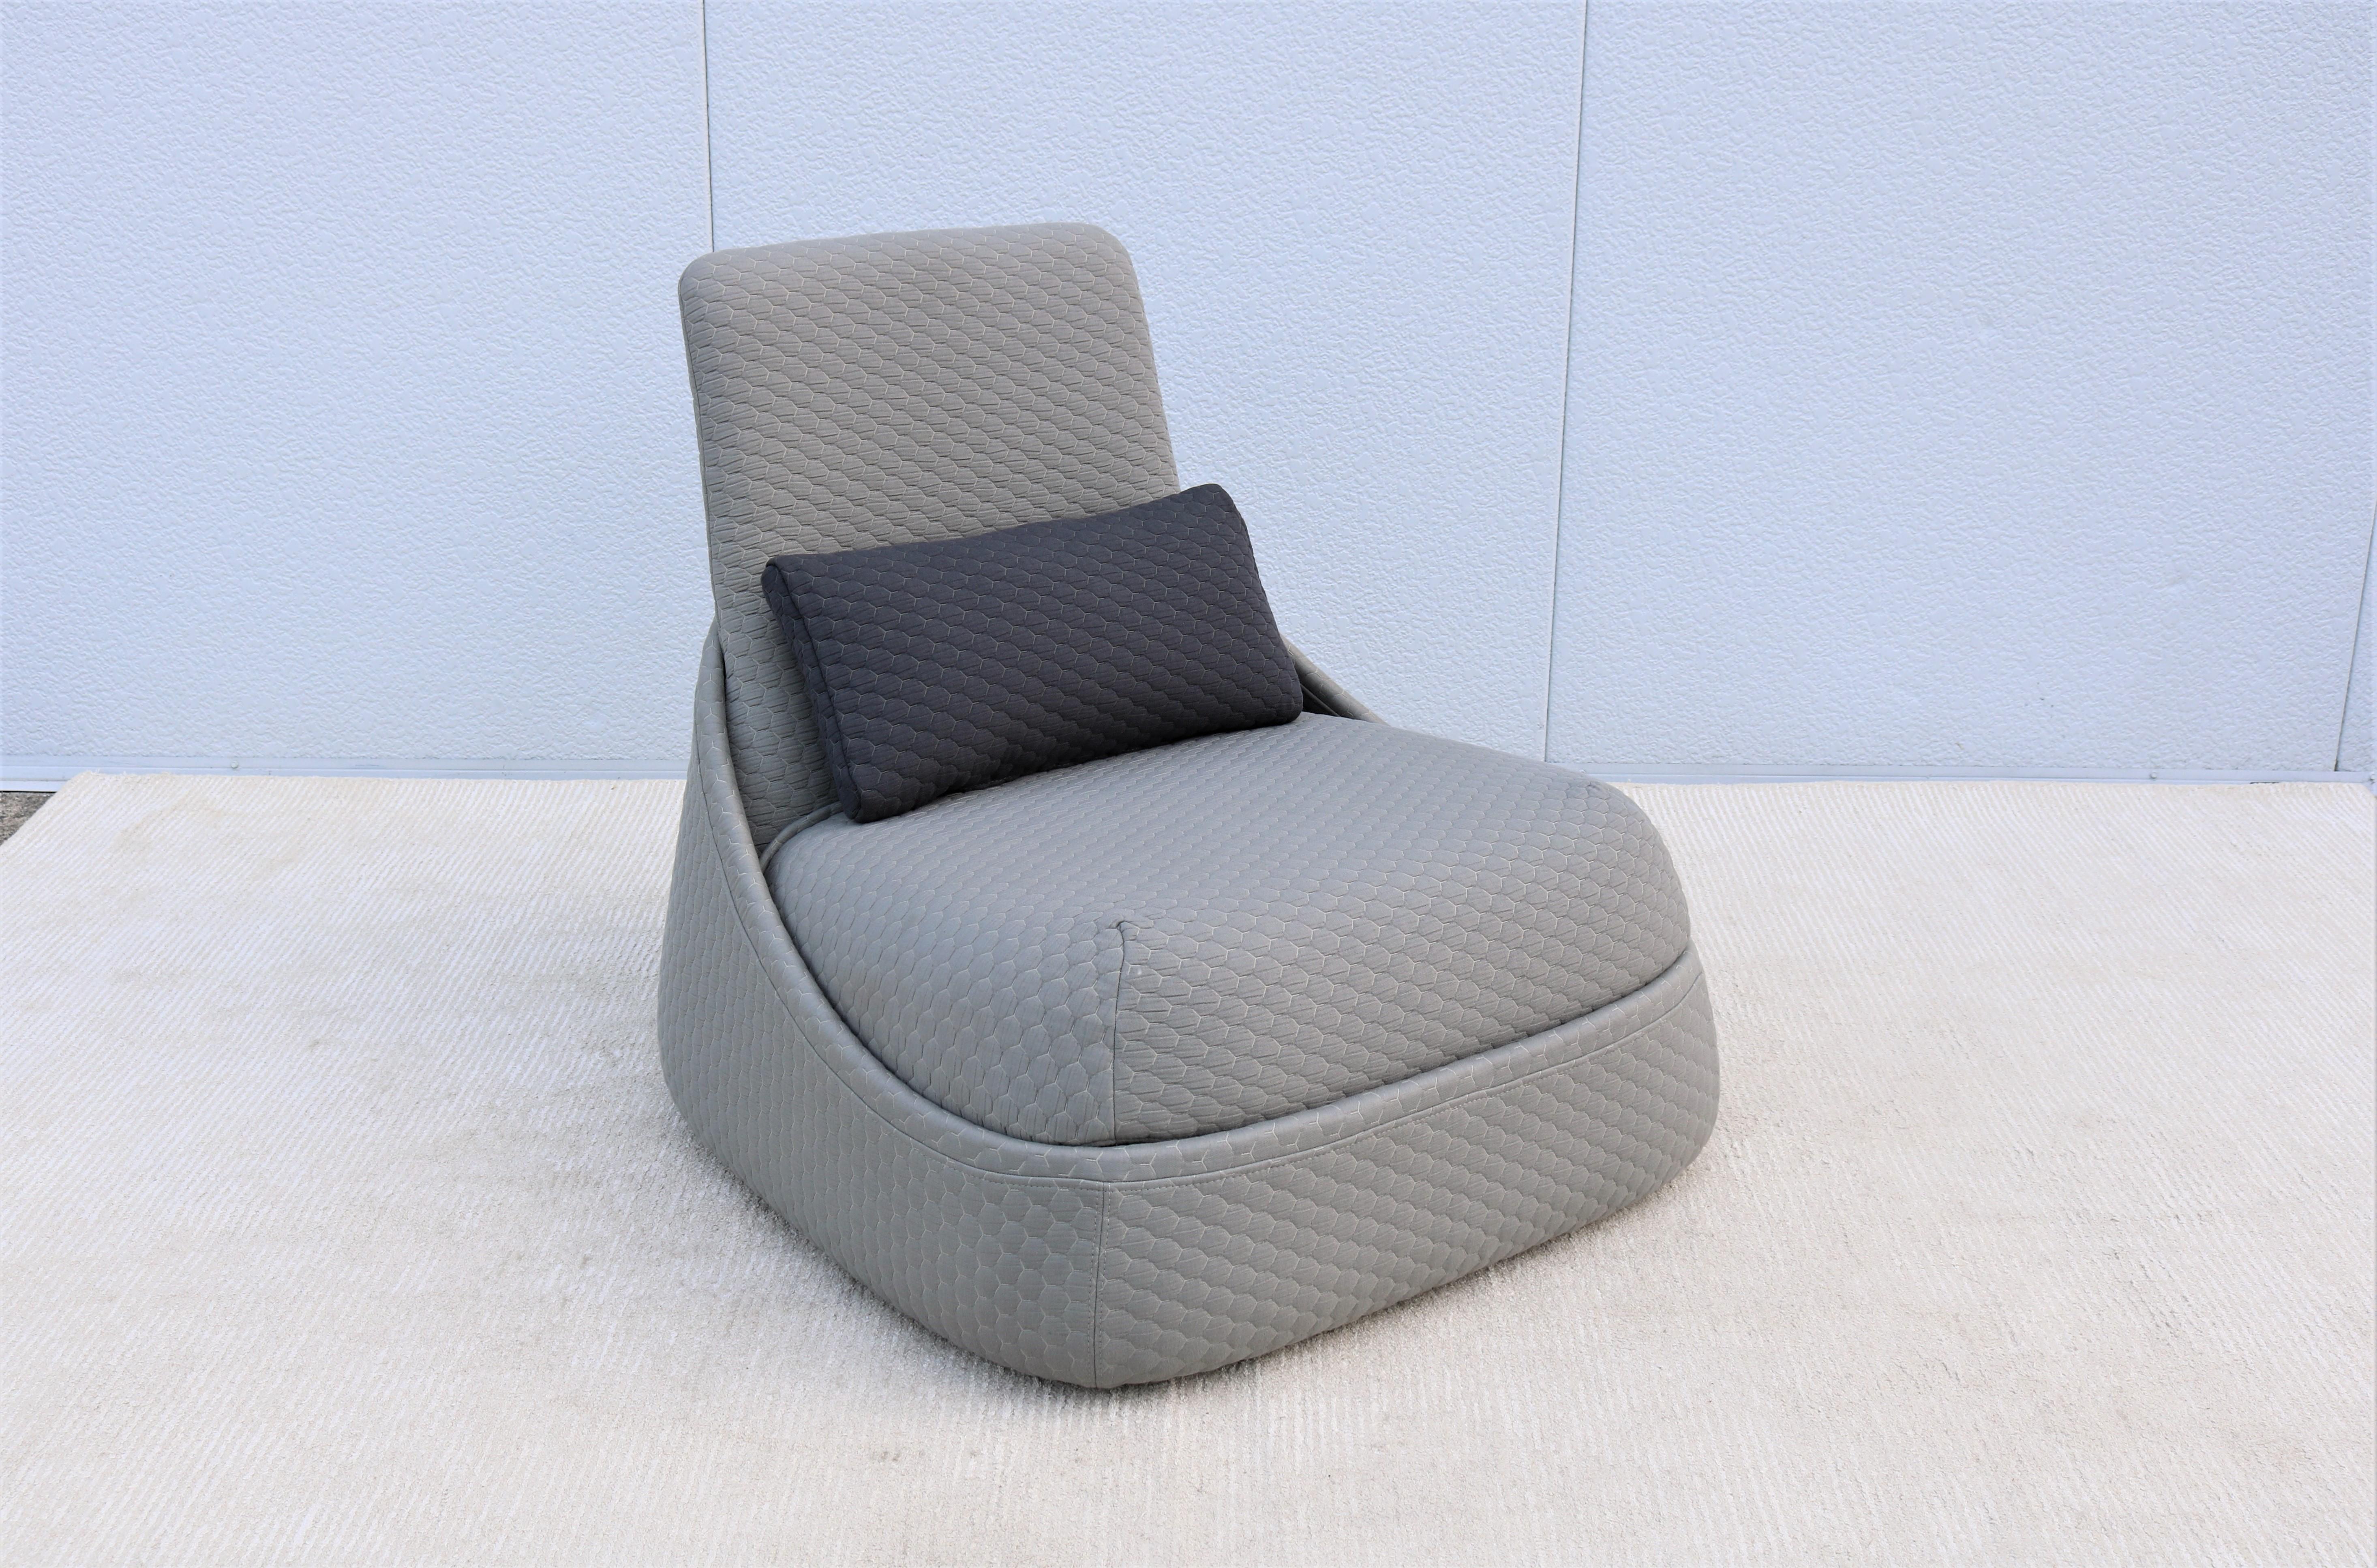 Modern Patricia Urquiola for Coalesse Hosu Chaise Lounge Chair with Ottoman In Excellent Condition For Sale In Secaucus, NJ